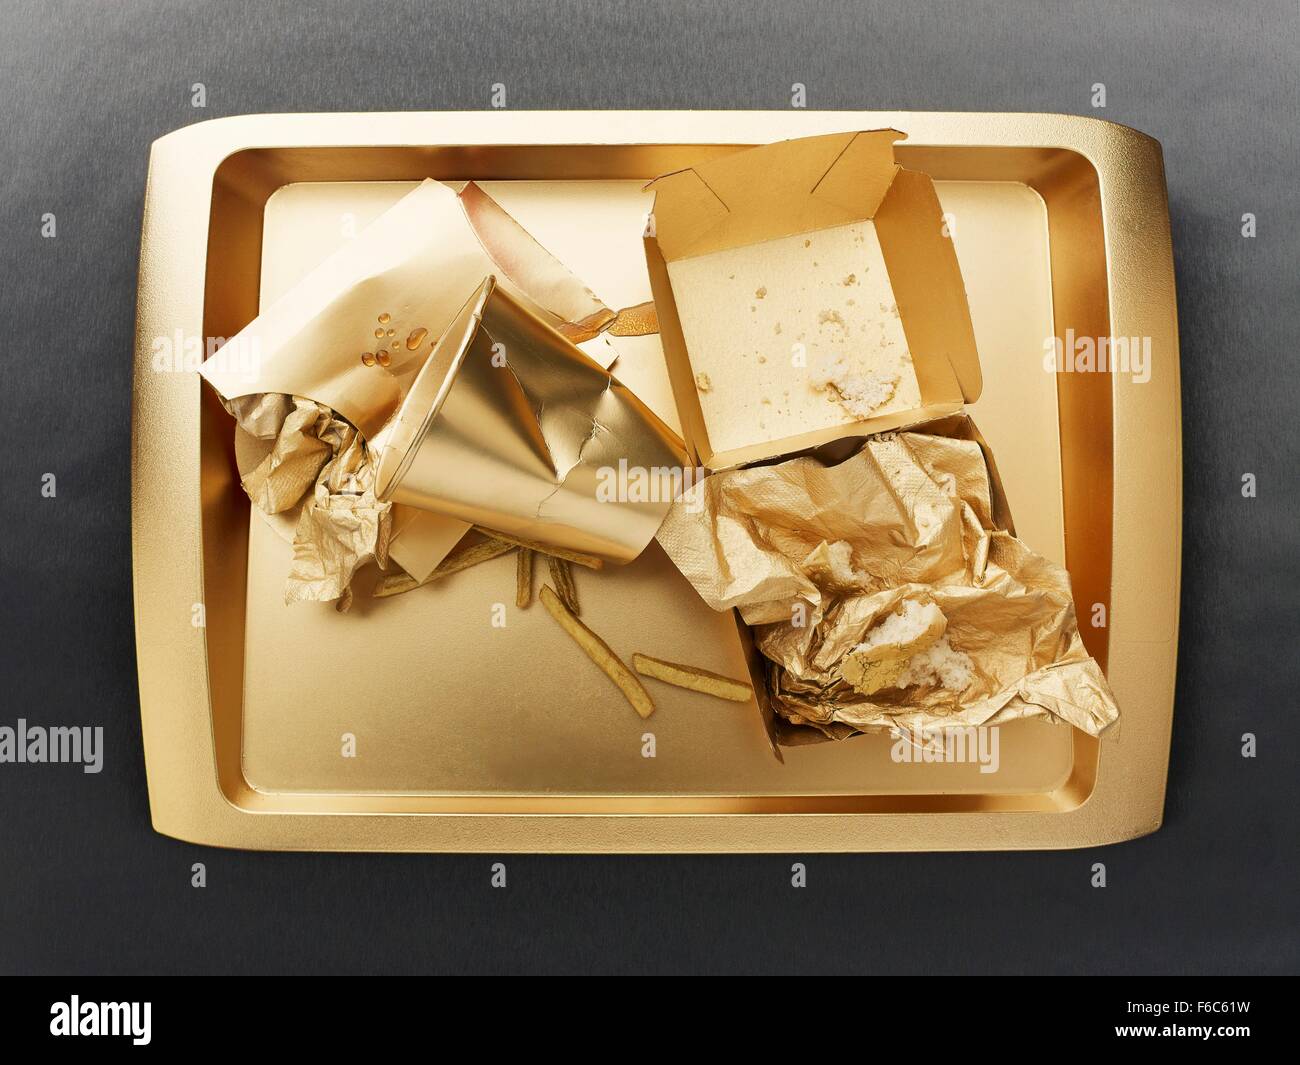 The remains of a fast food meal on a gold-coloured tray Stock Photo